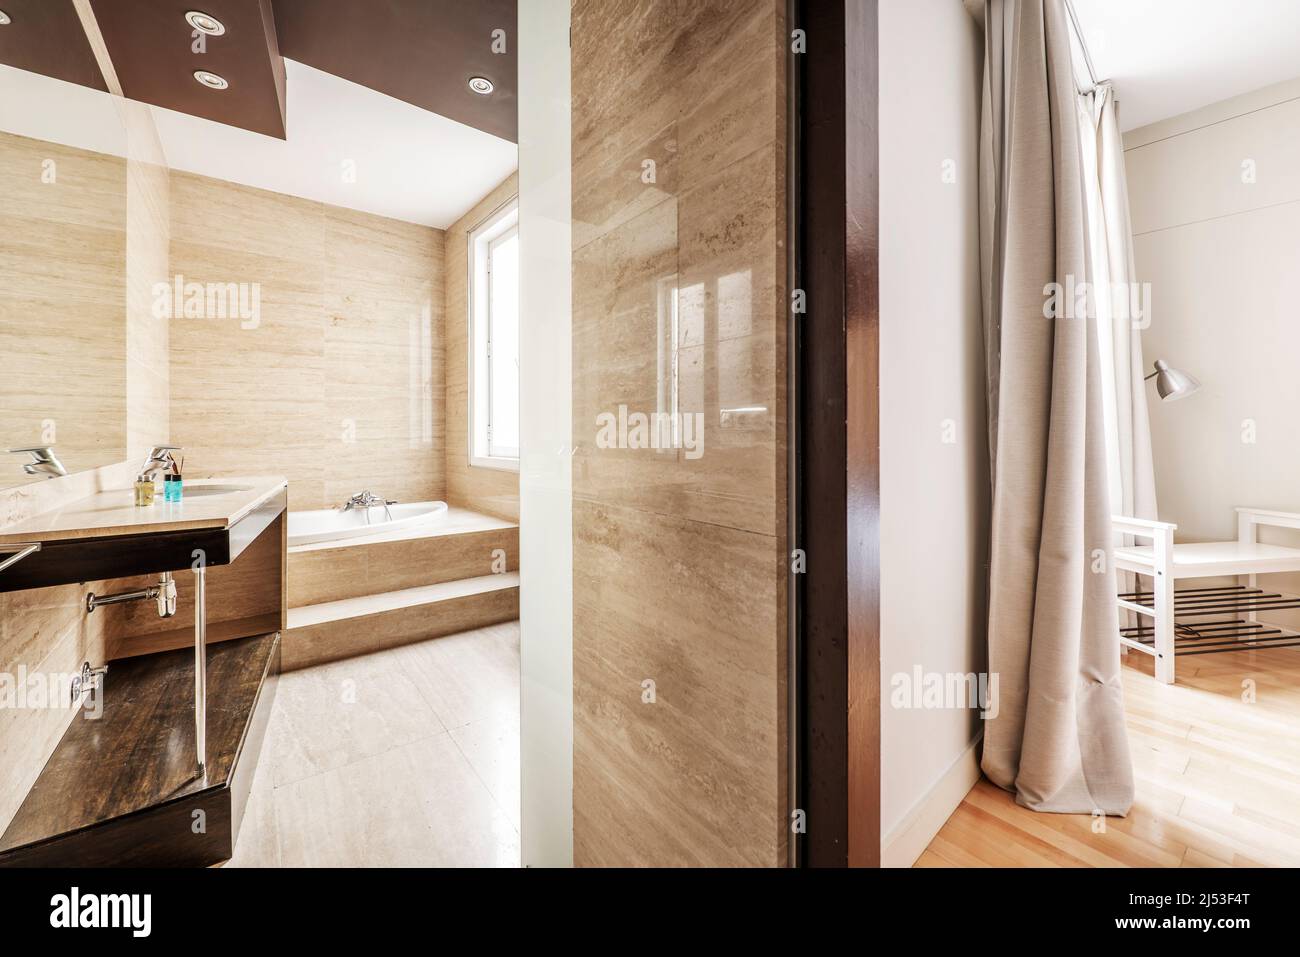 Bathroom with whirlpool tub and polished marble cladding and hardwoods in an en-suite bedroom Stock Photo